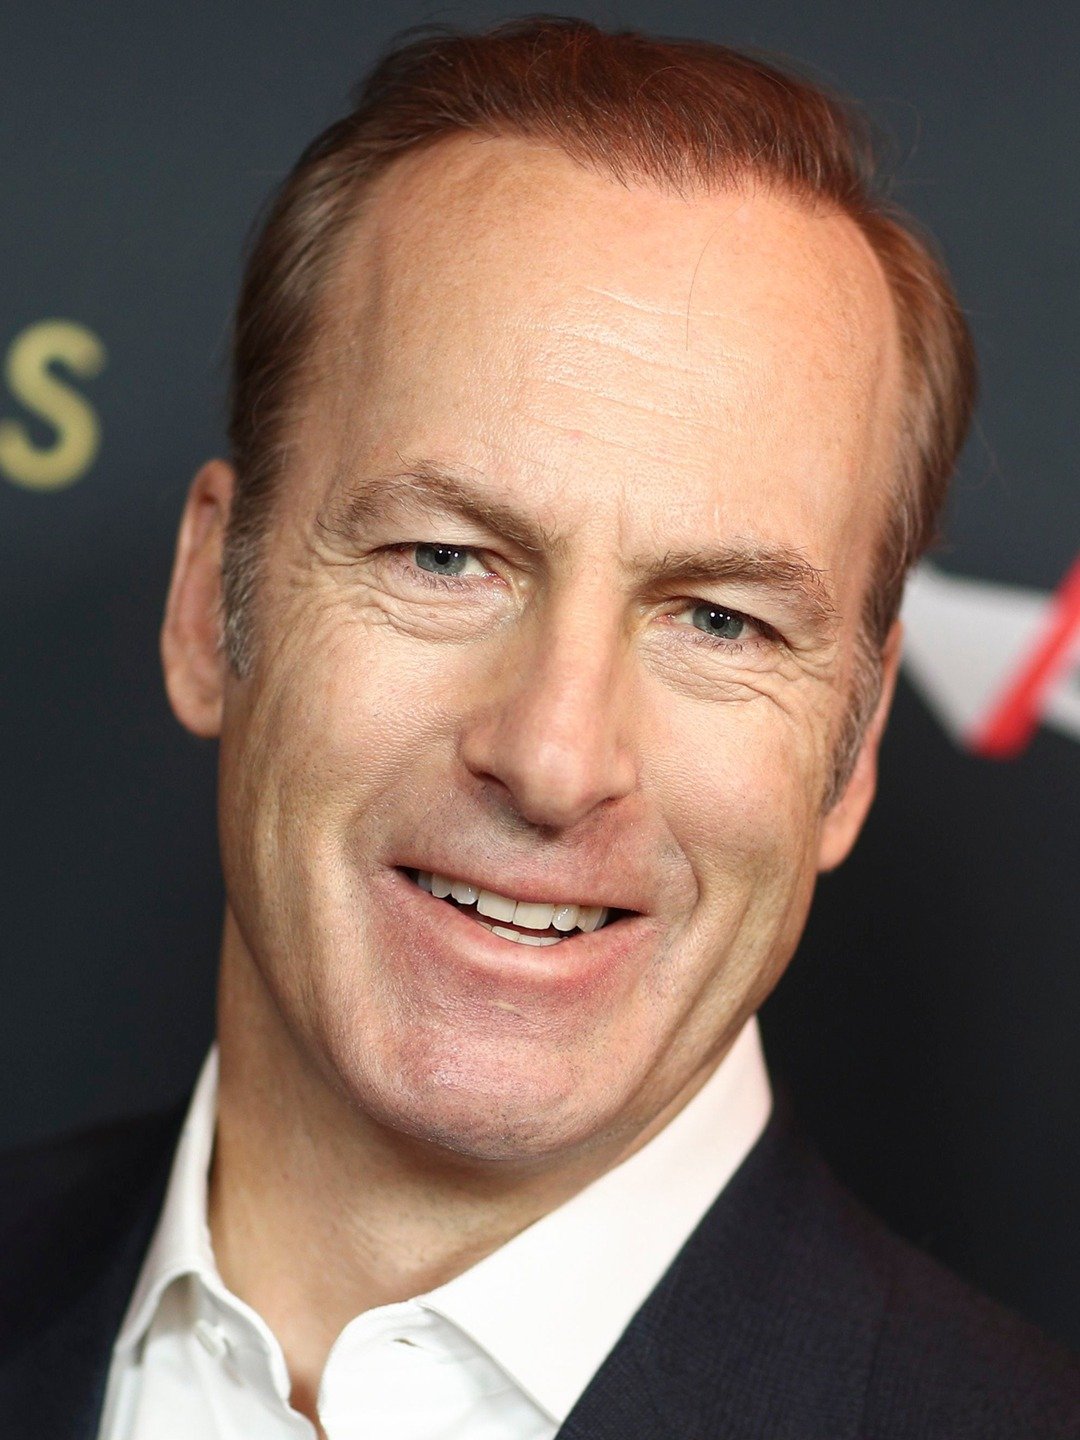 How tall is Bob Odenkirk?